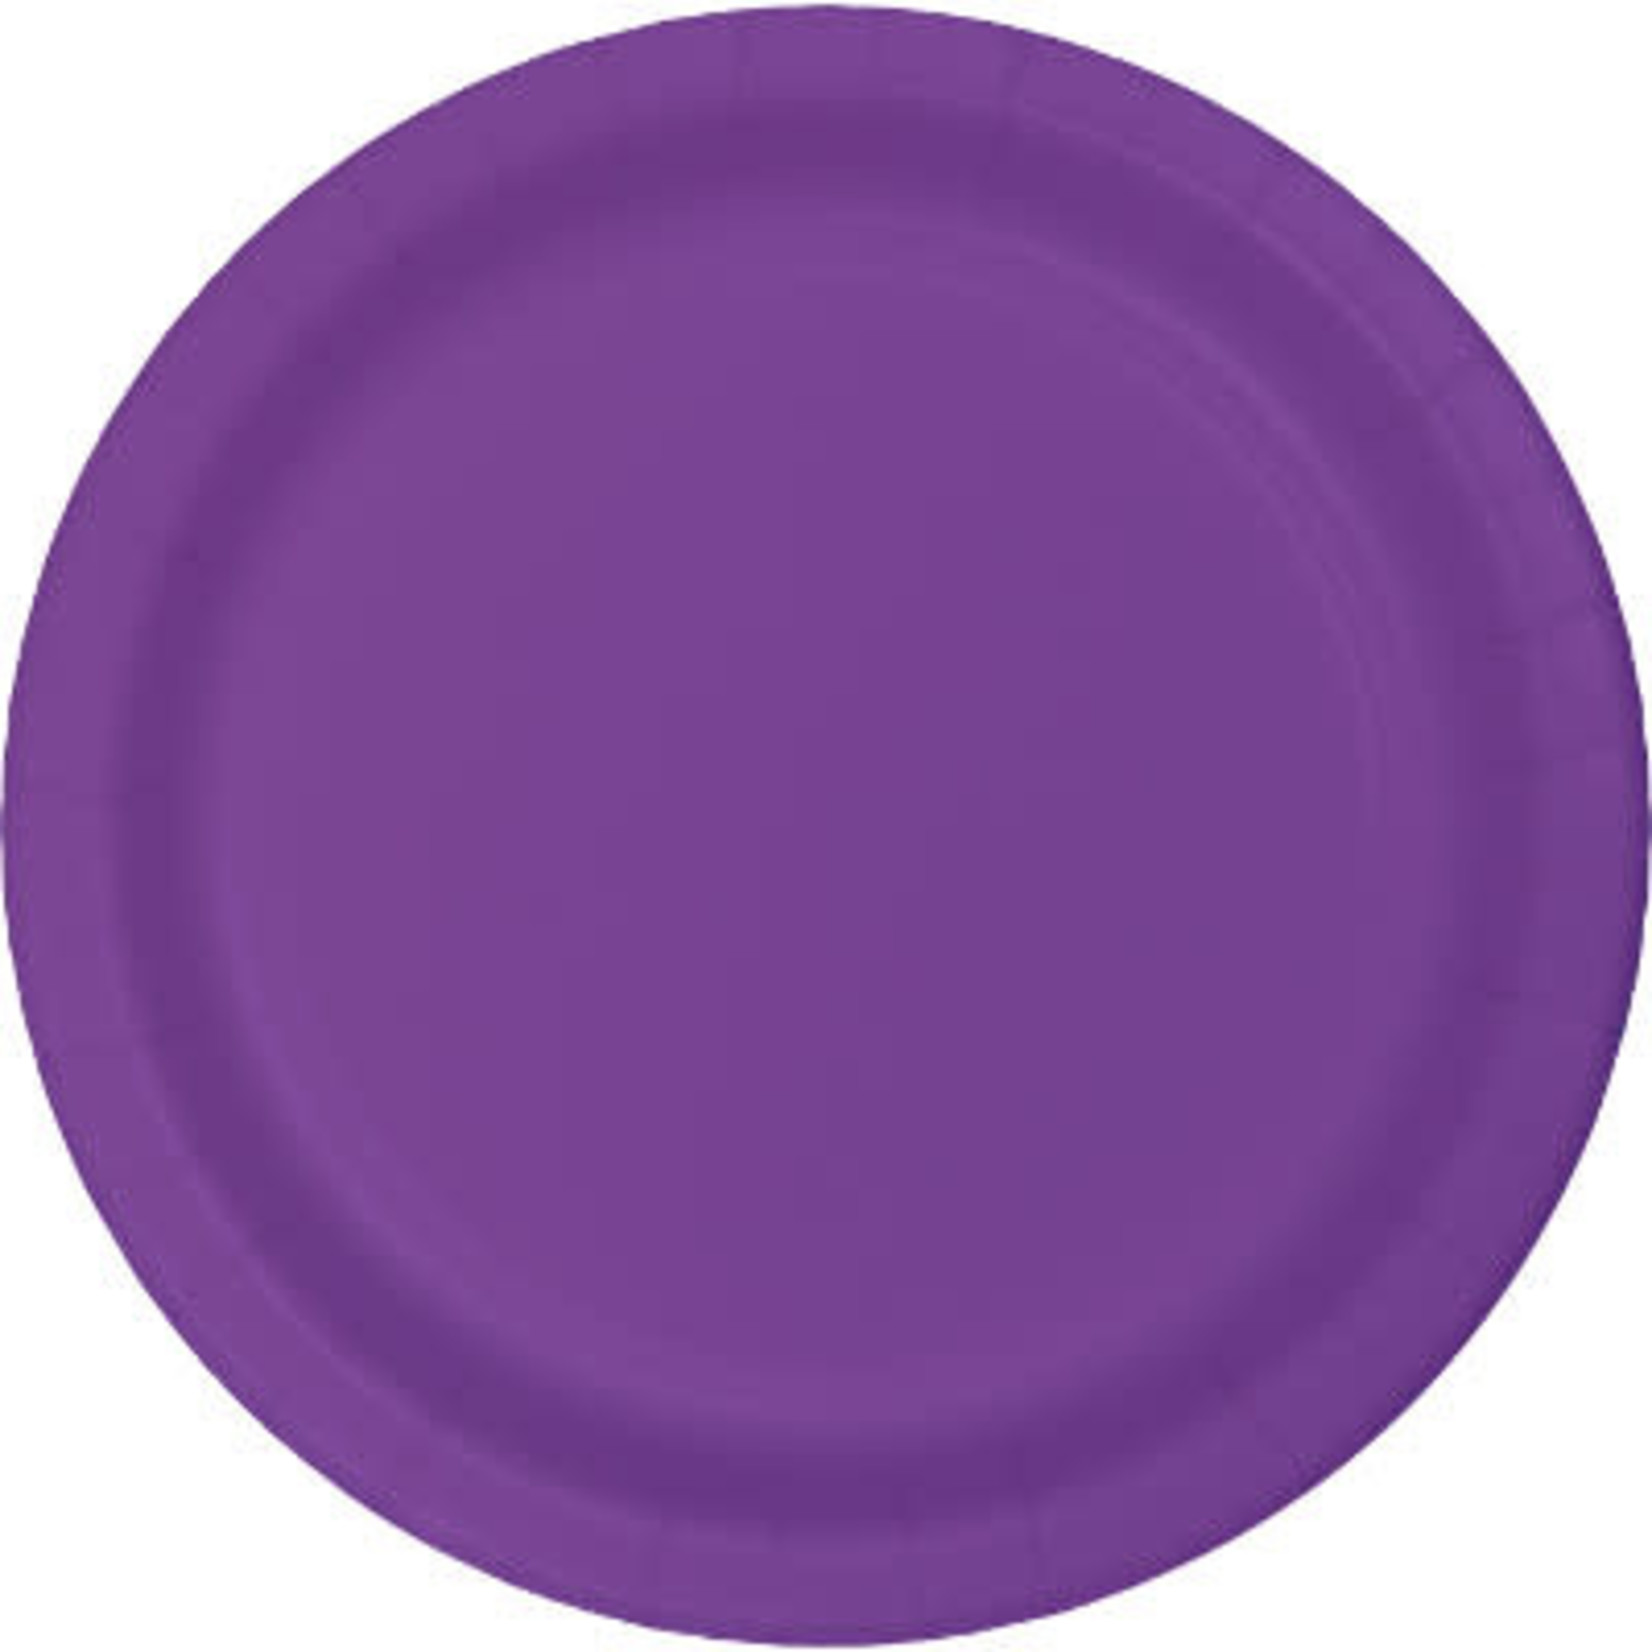 Touch of Color 7" Amethyst Purple Paper Plates - 24ct.